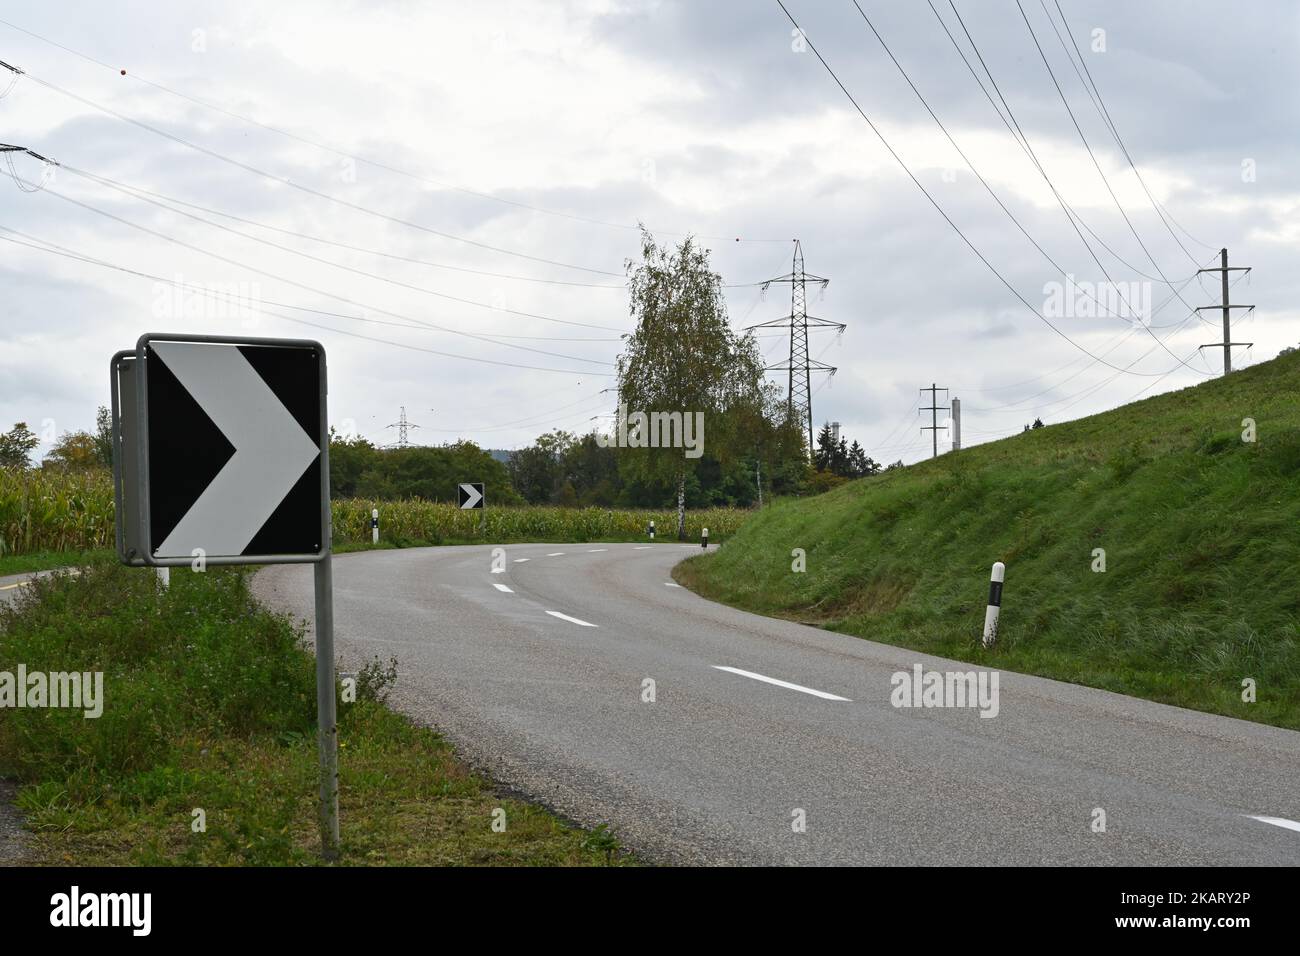 Warning black and white arrow traffic sign on sharp, dangerous road bend in a mountainous area. Stock Photo